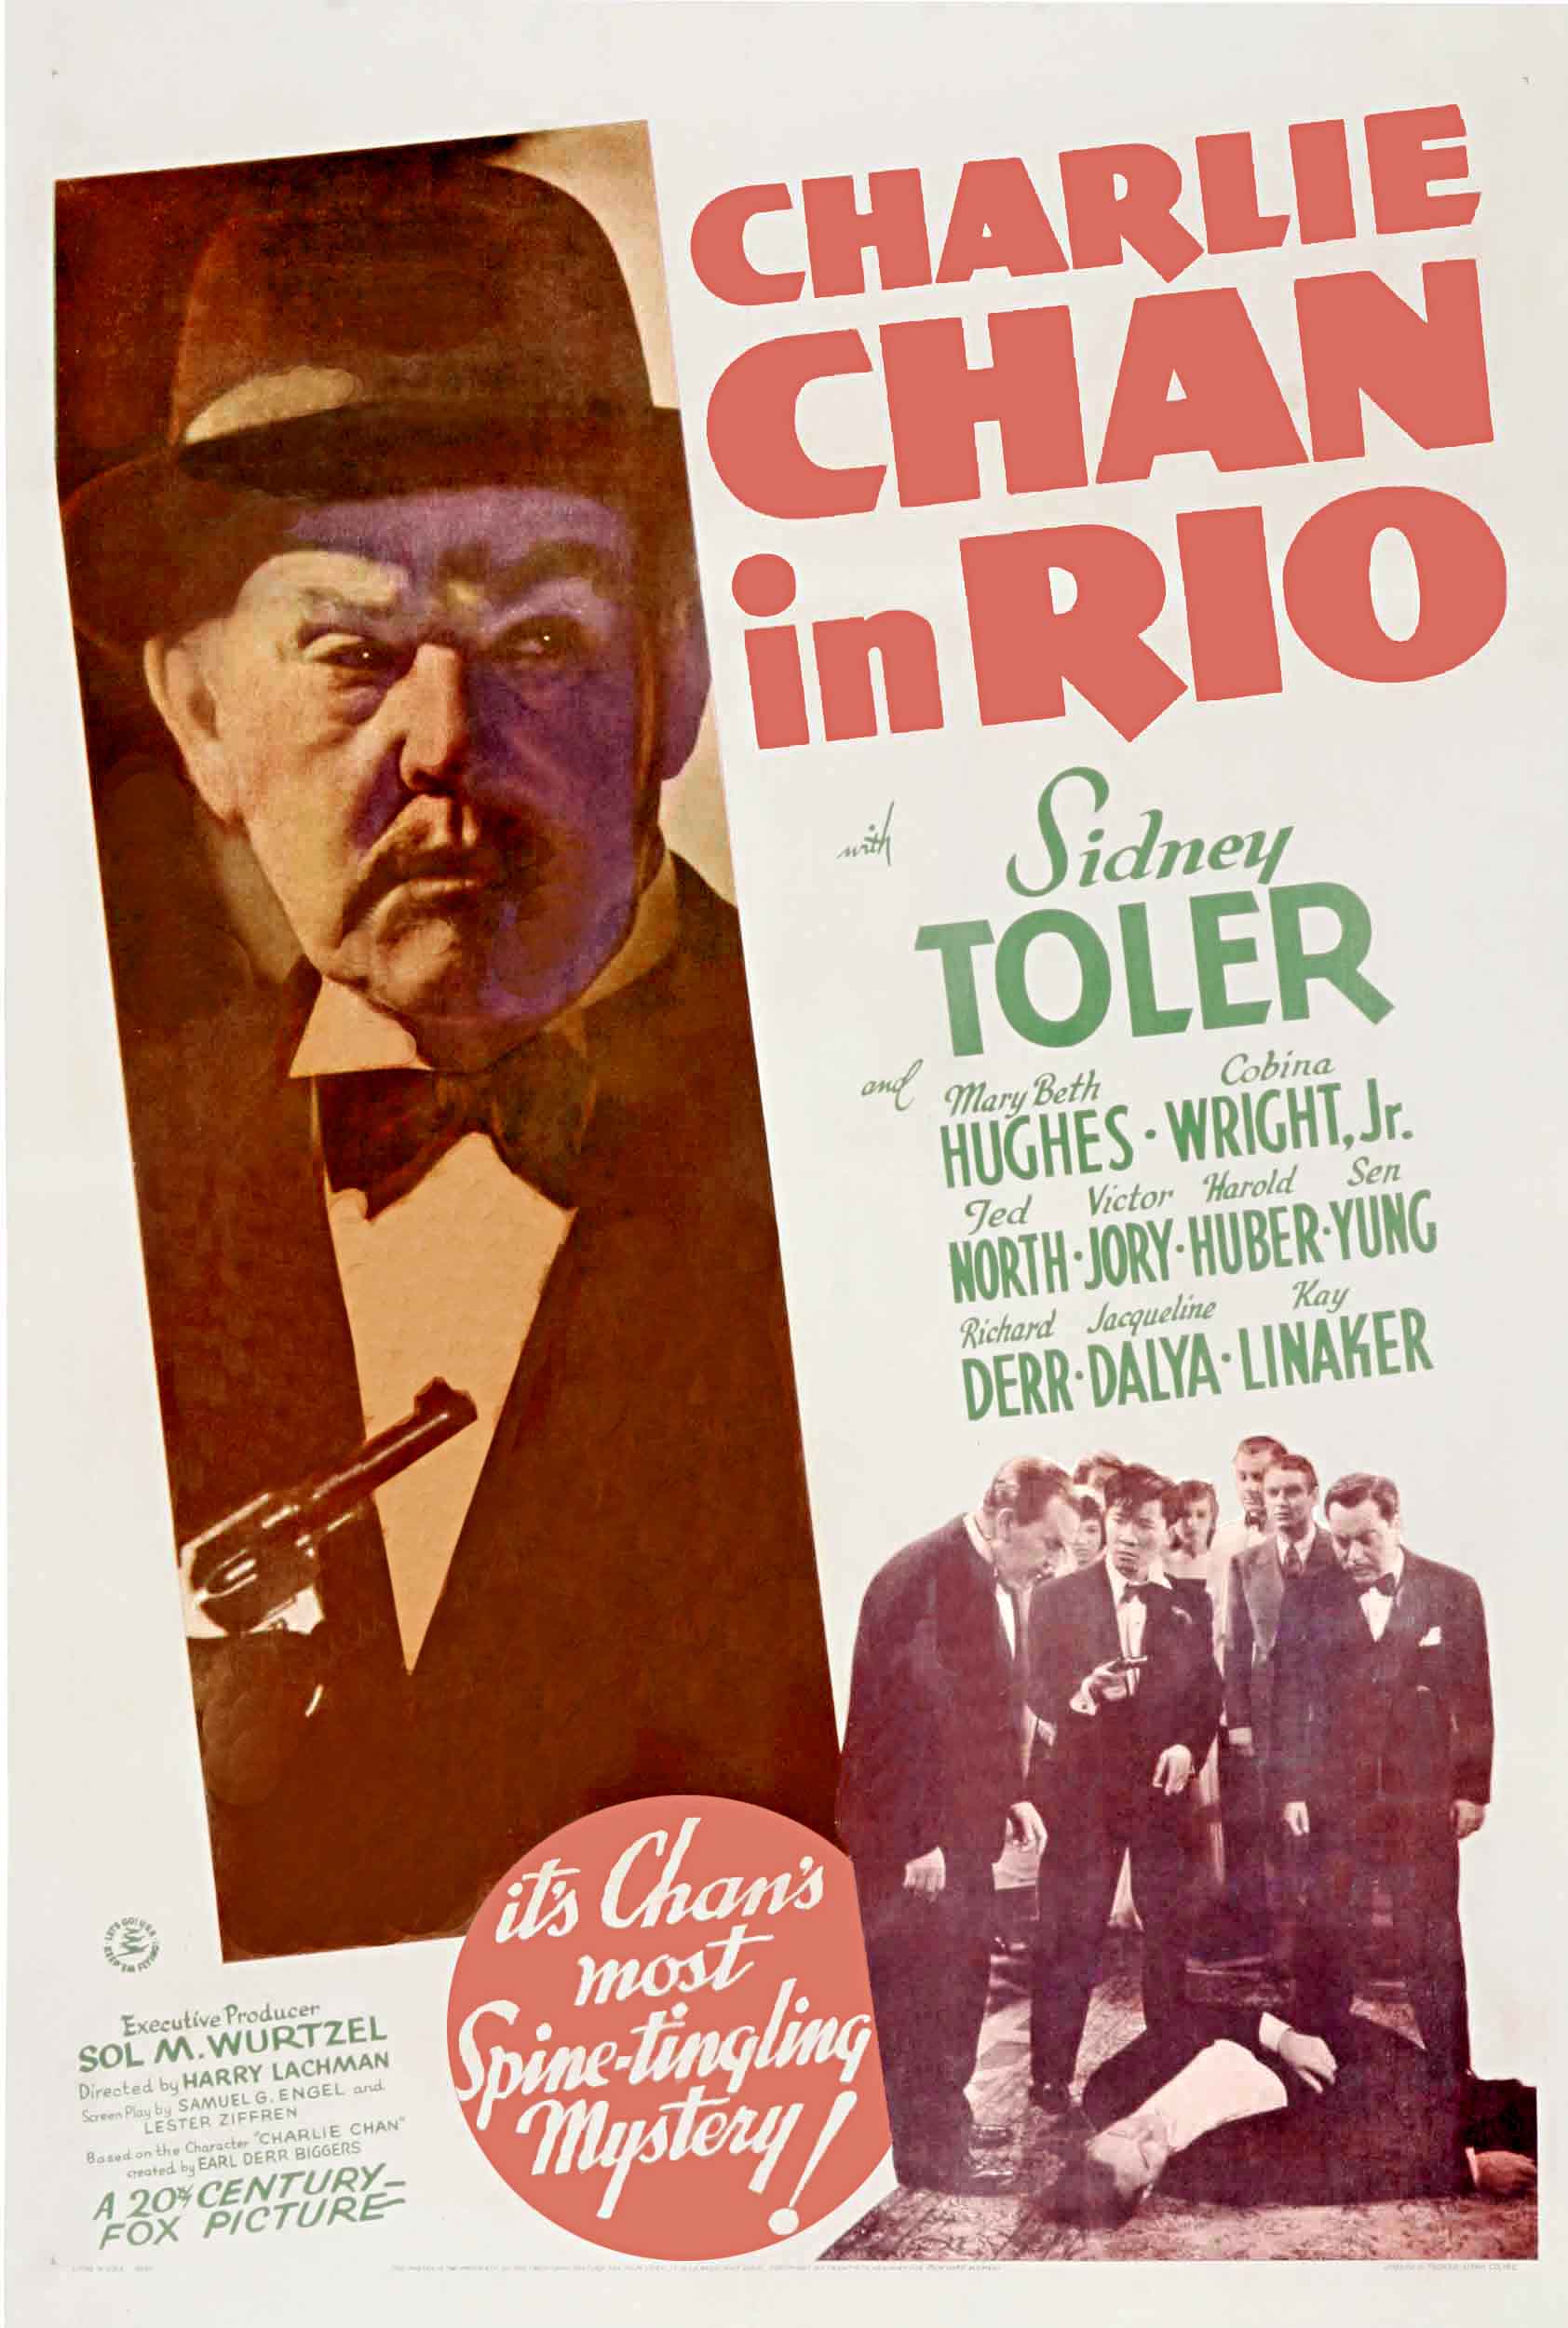 CHARLIE CHAN IN RIO (1941)